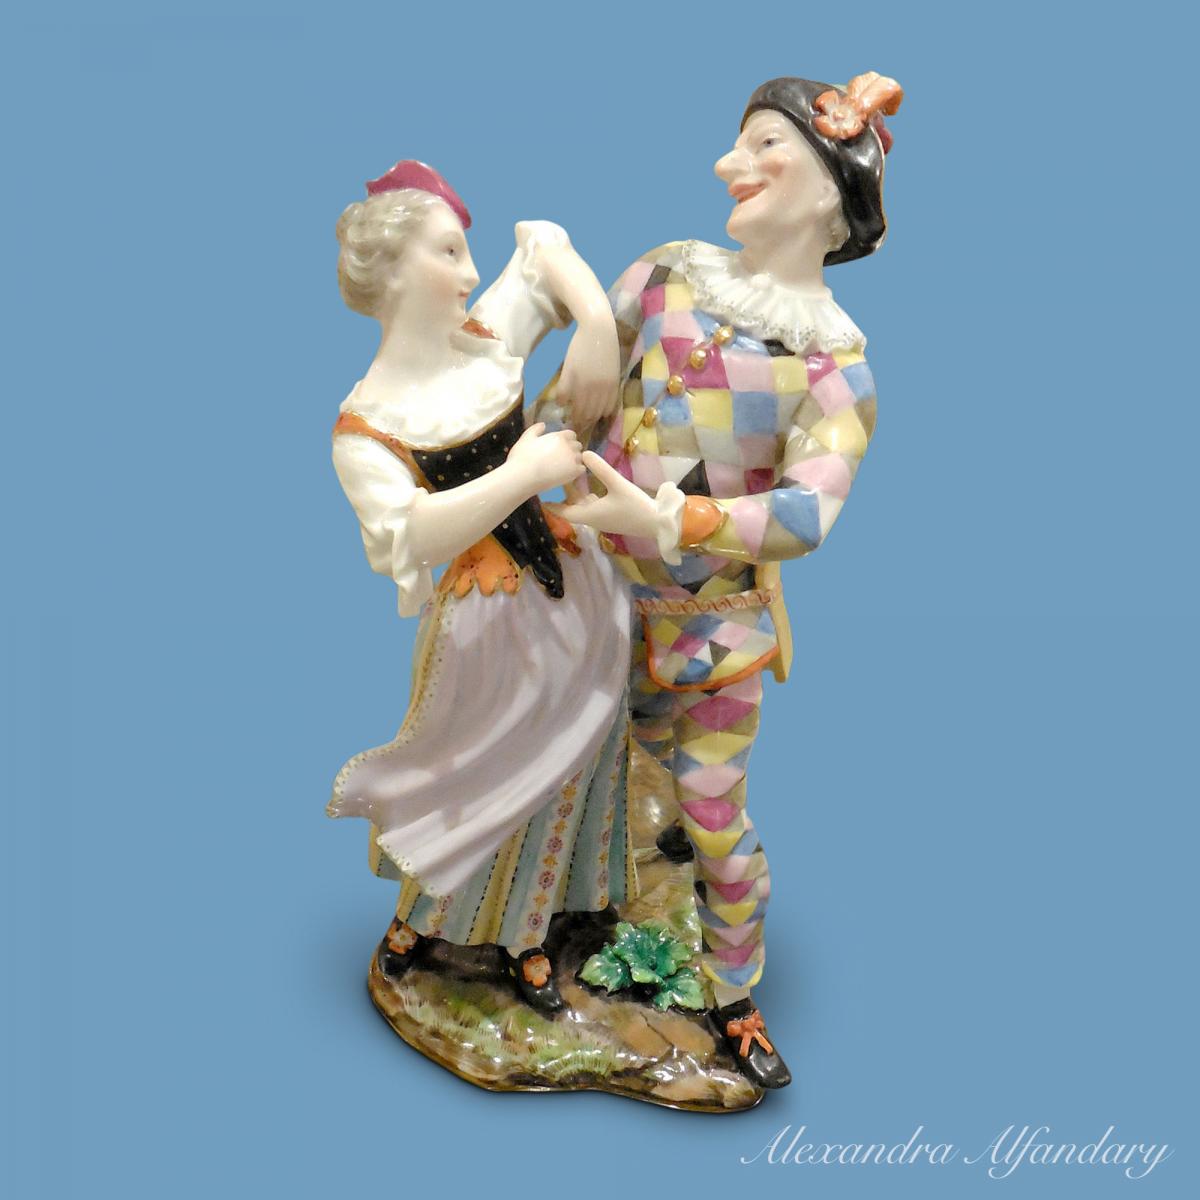 A Meissen Porcelain Group of Dancing Harlequin and Columbine, c. 1860-70